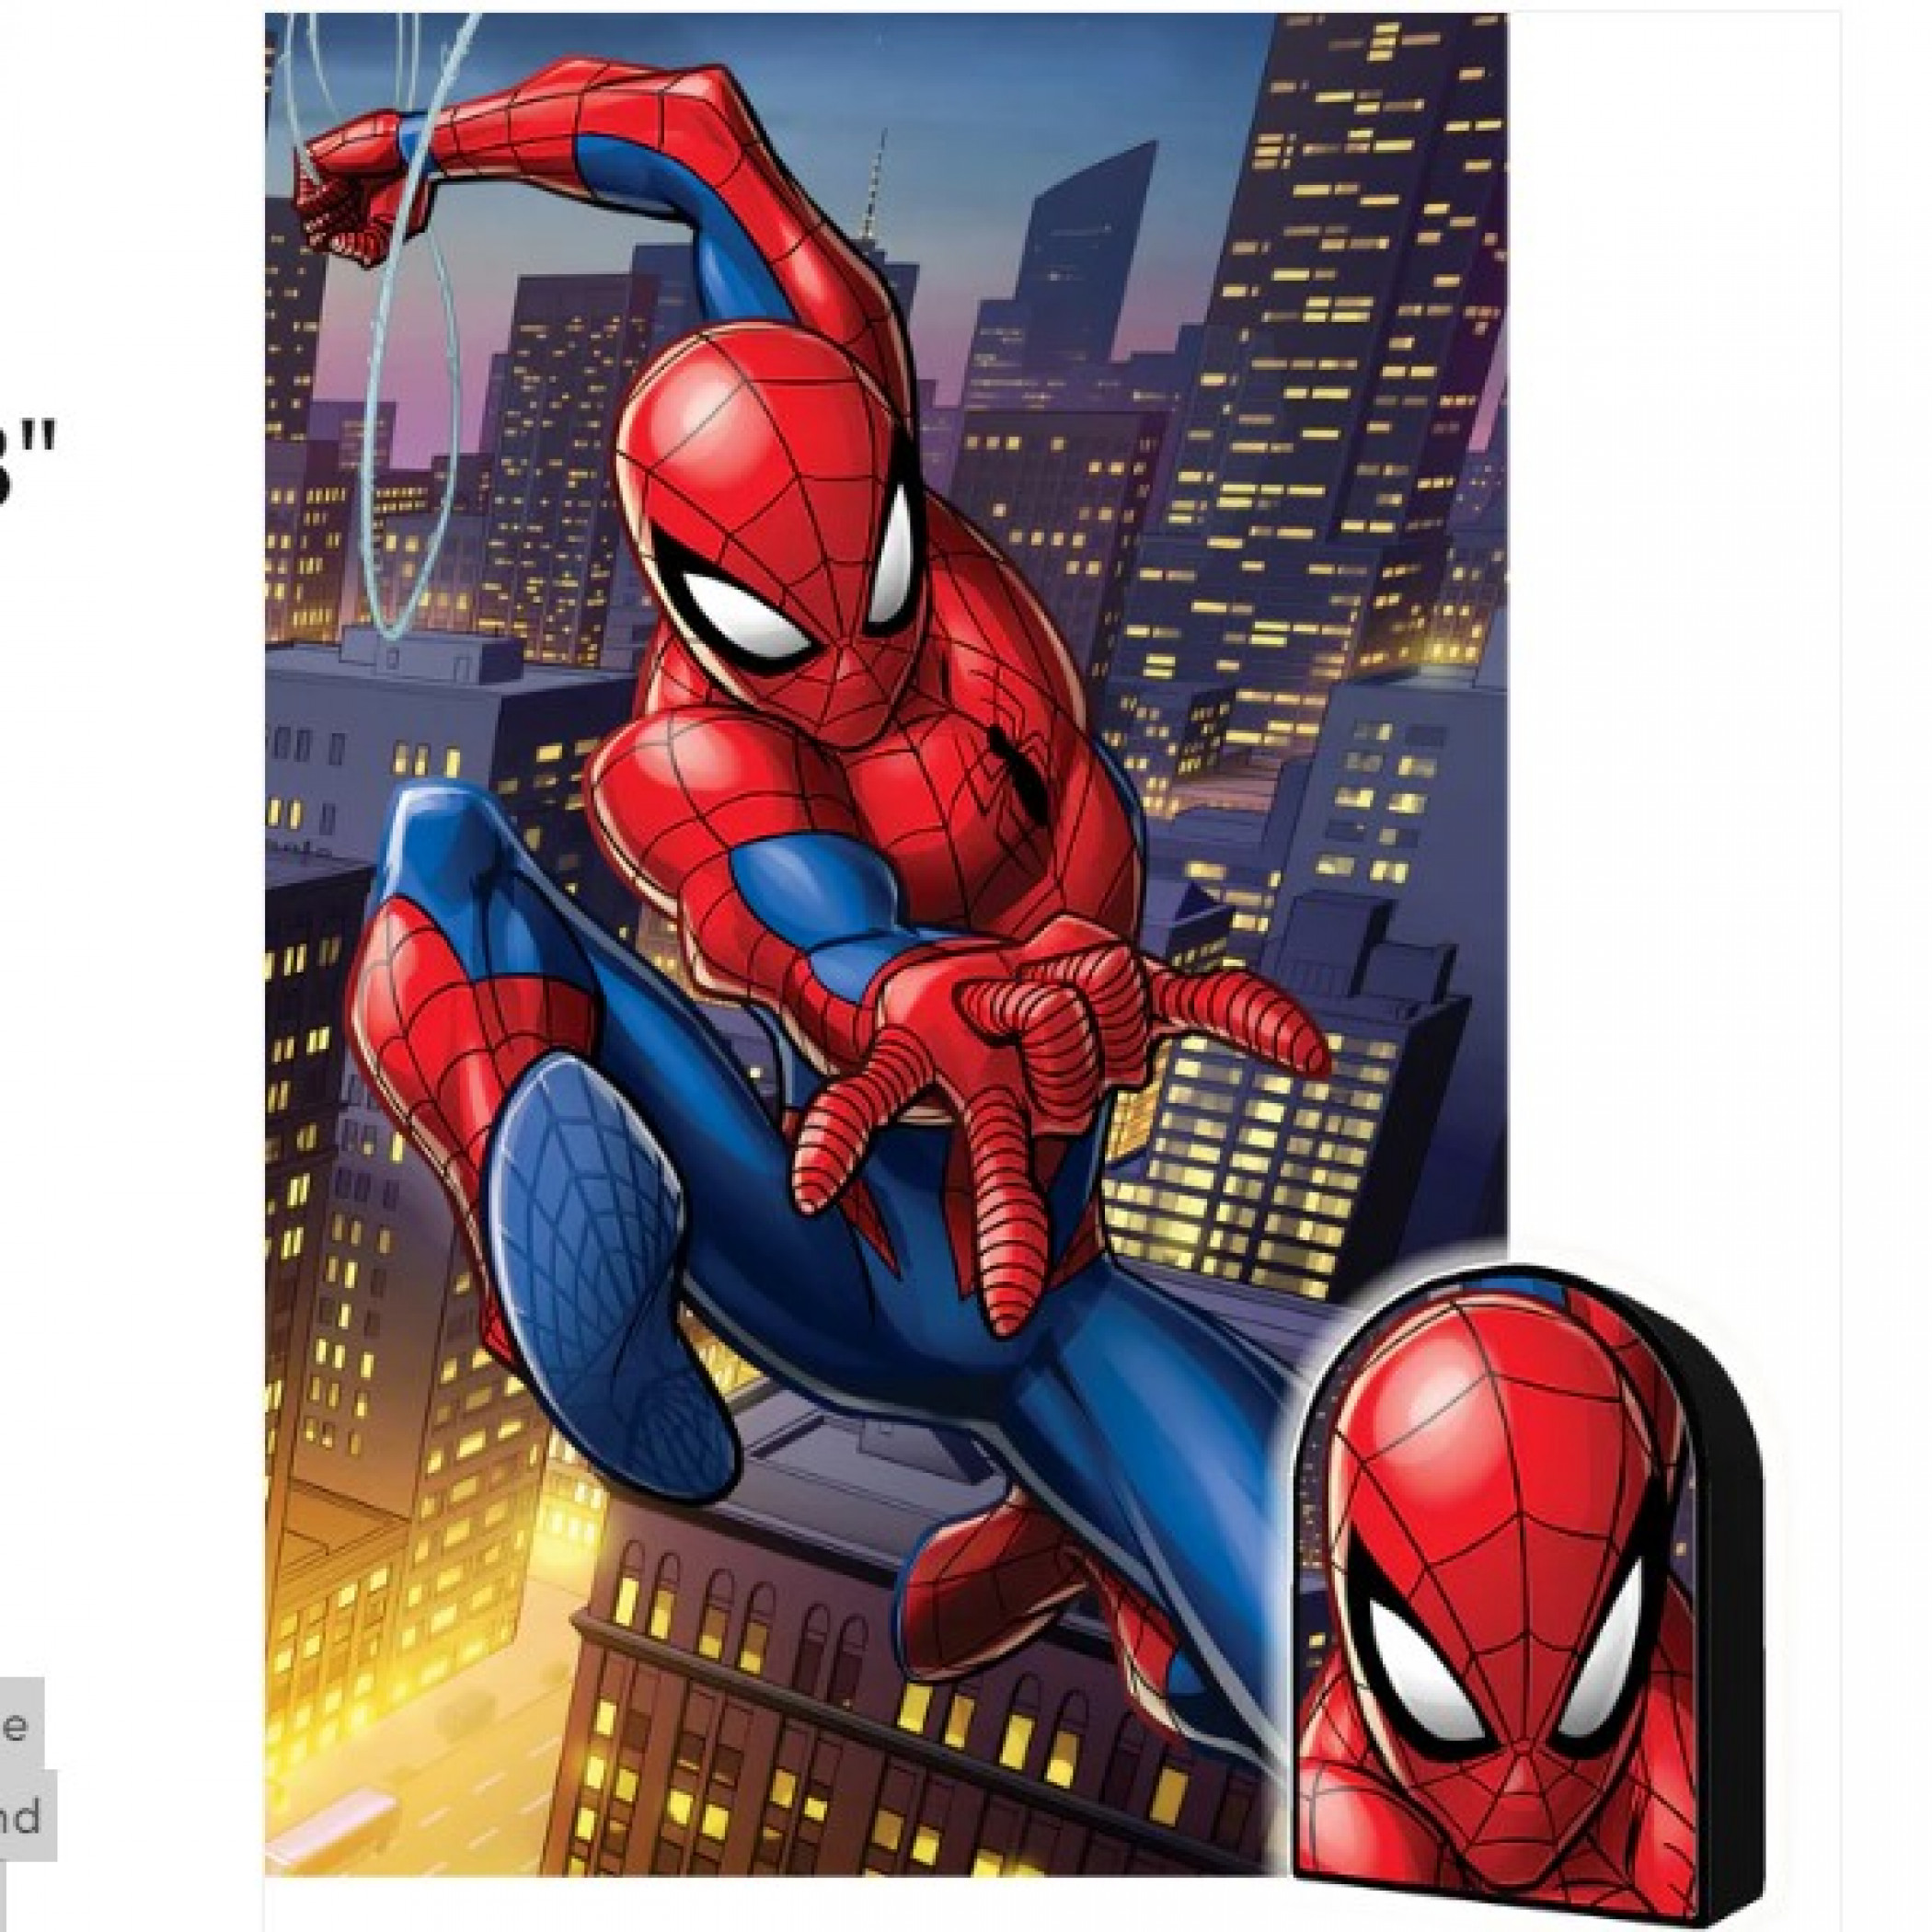 Spider-Man City at Night 3D Lenticular 300pc Jigsaw Puzzle in Collectors Tin